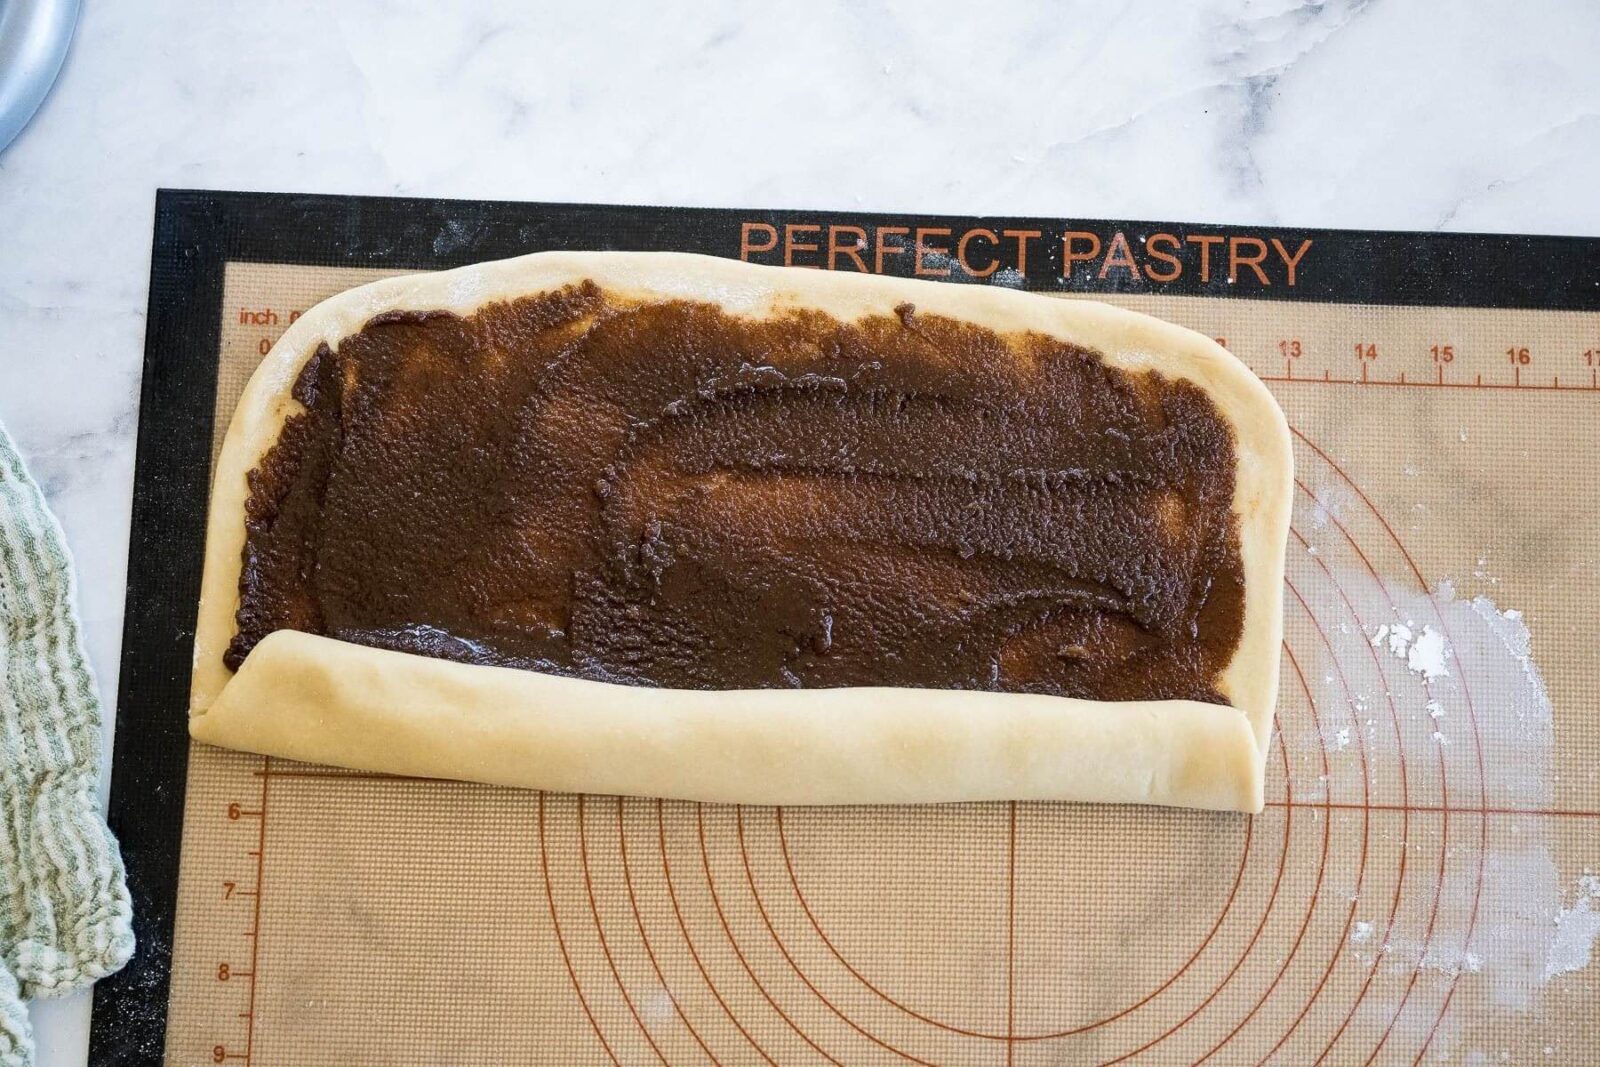 A slab of cinnamon covered dough has one long side starting to roll up.